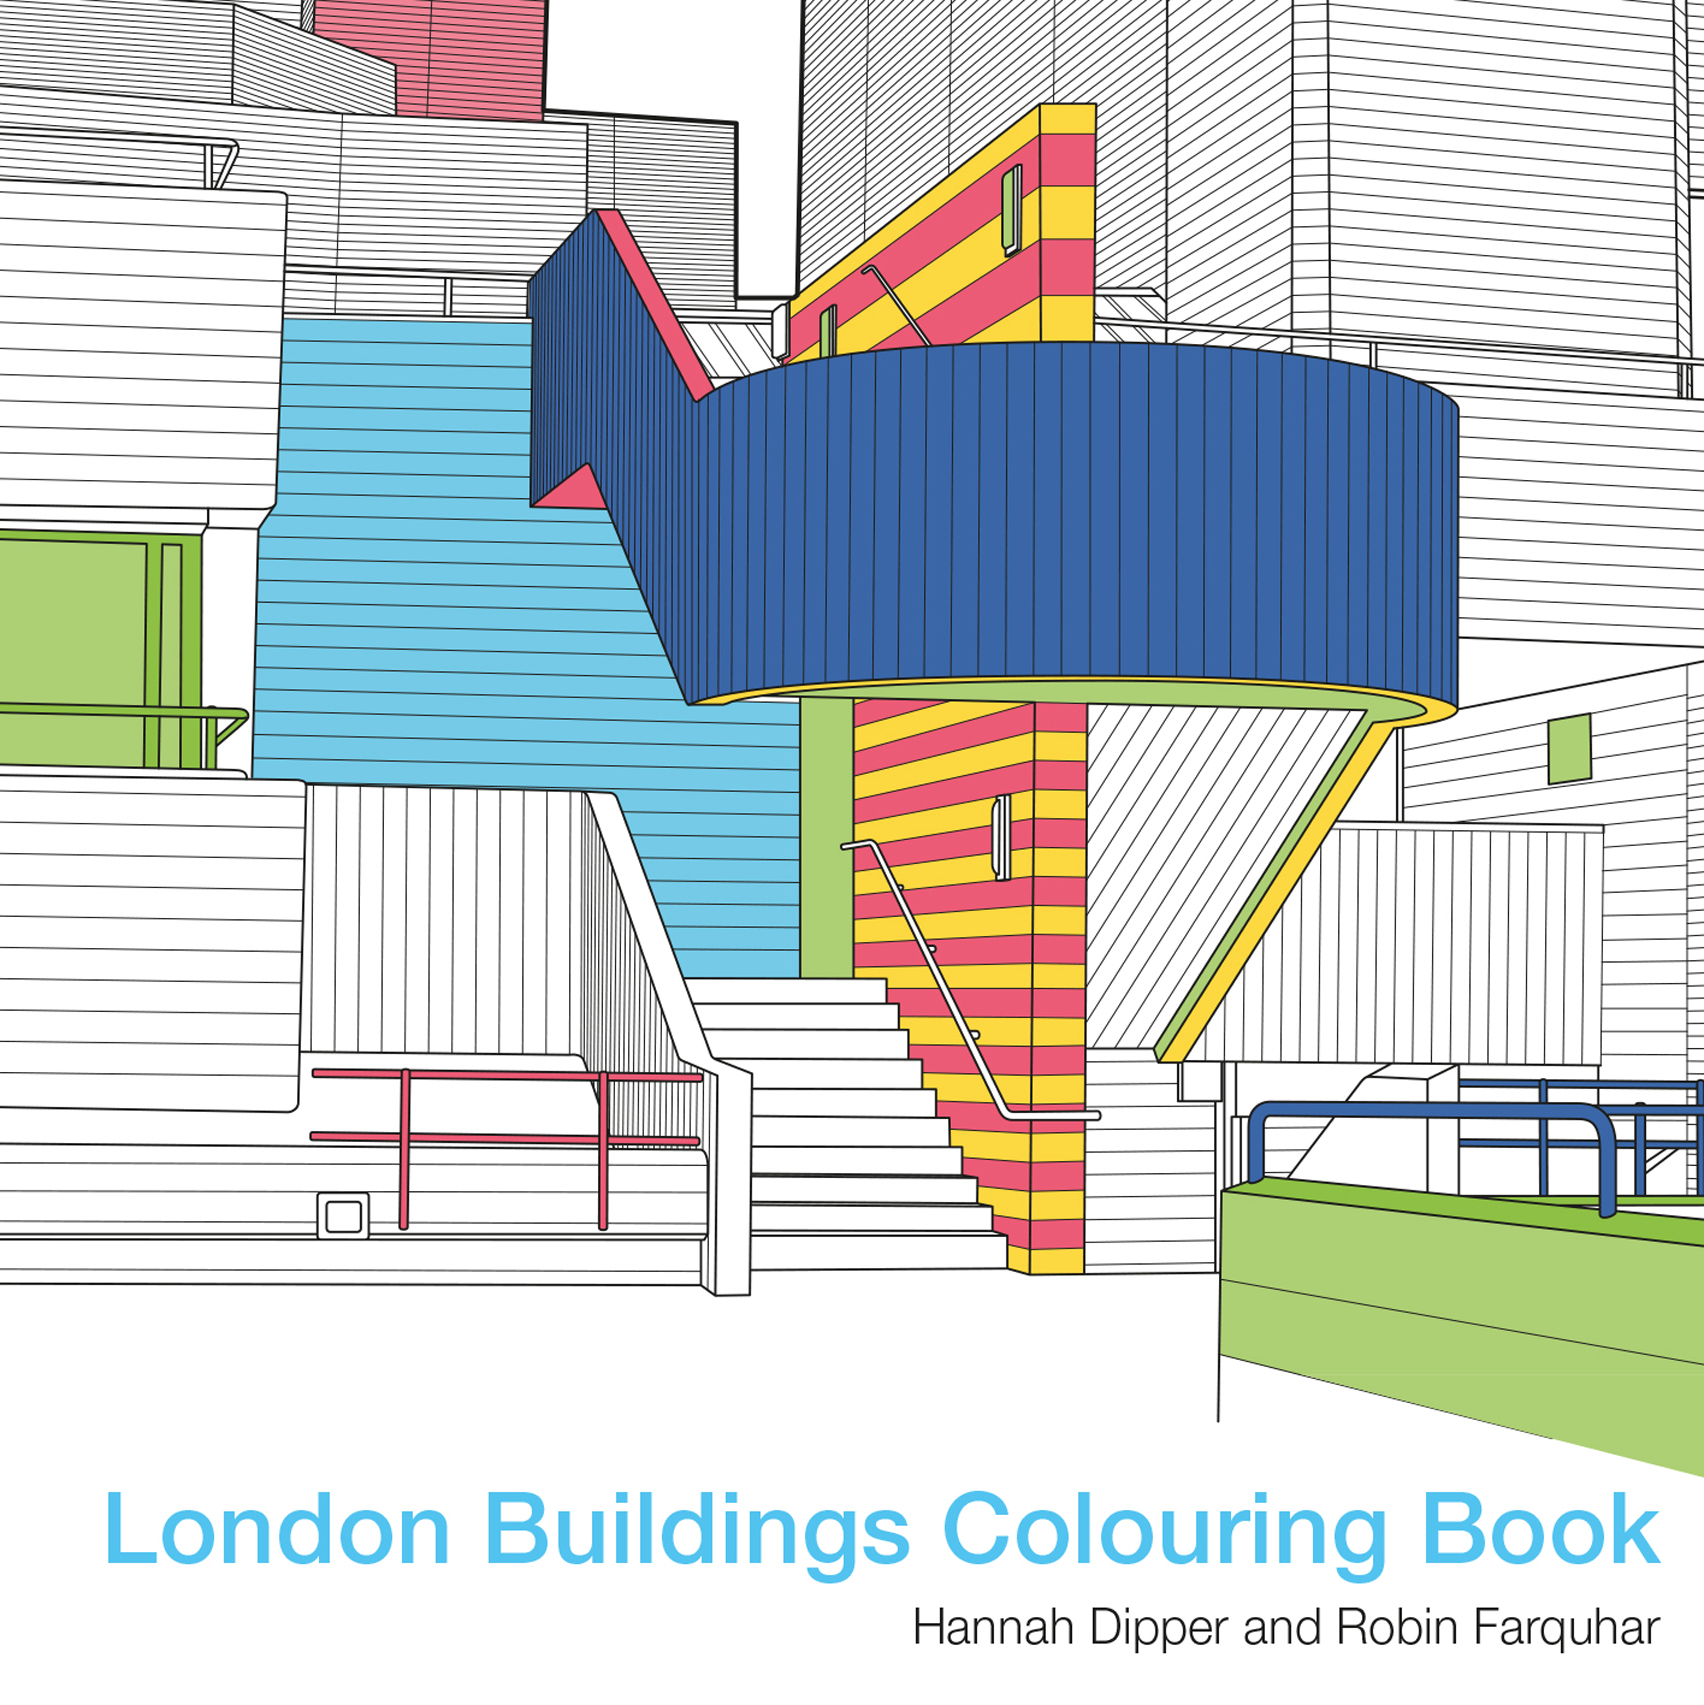 The London Buildings Colouring Book by Hannah Dipper and Robin Farquhar